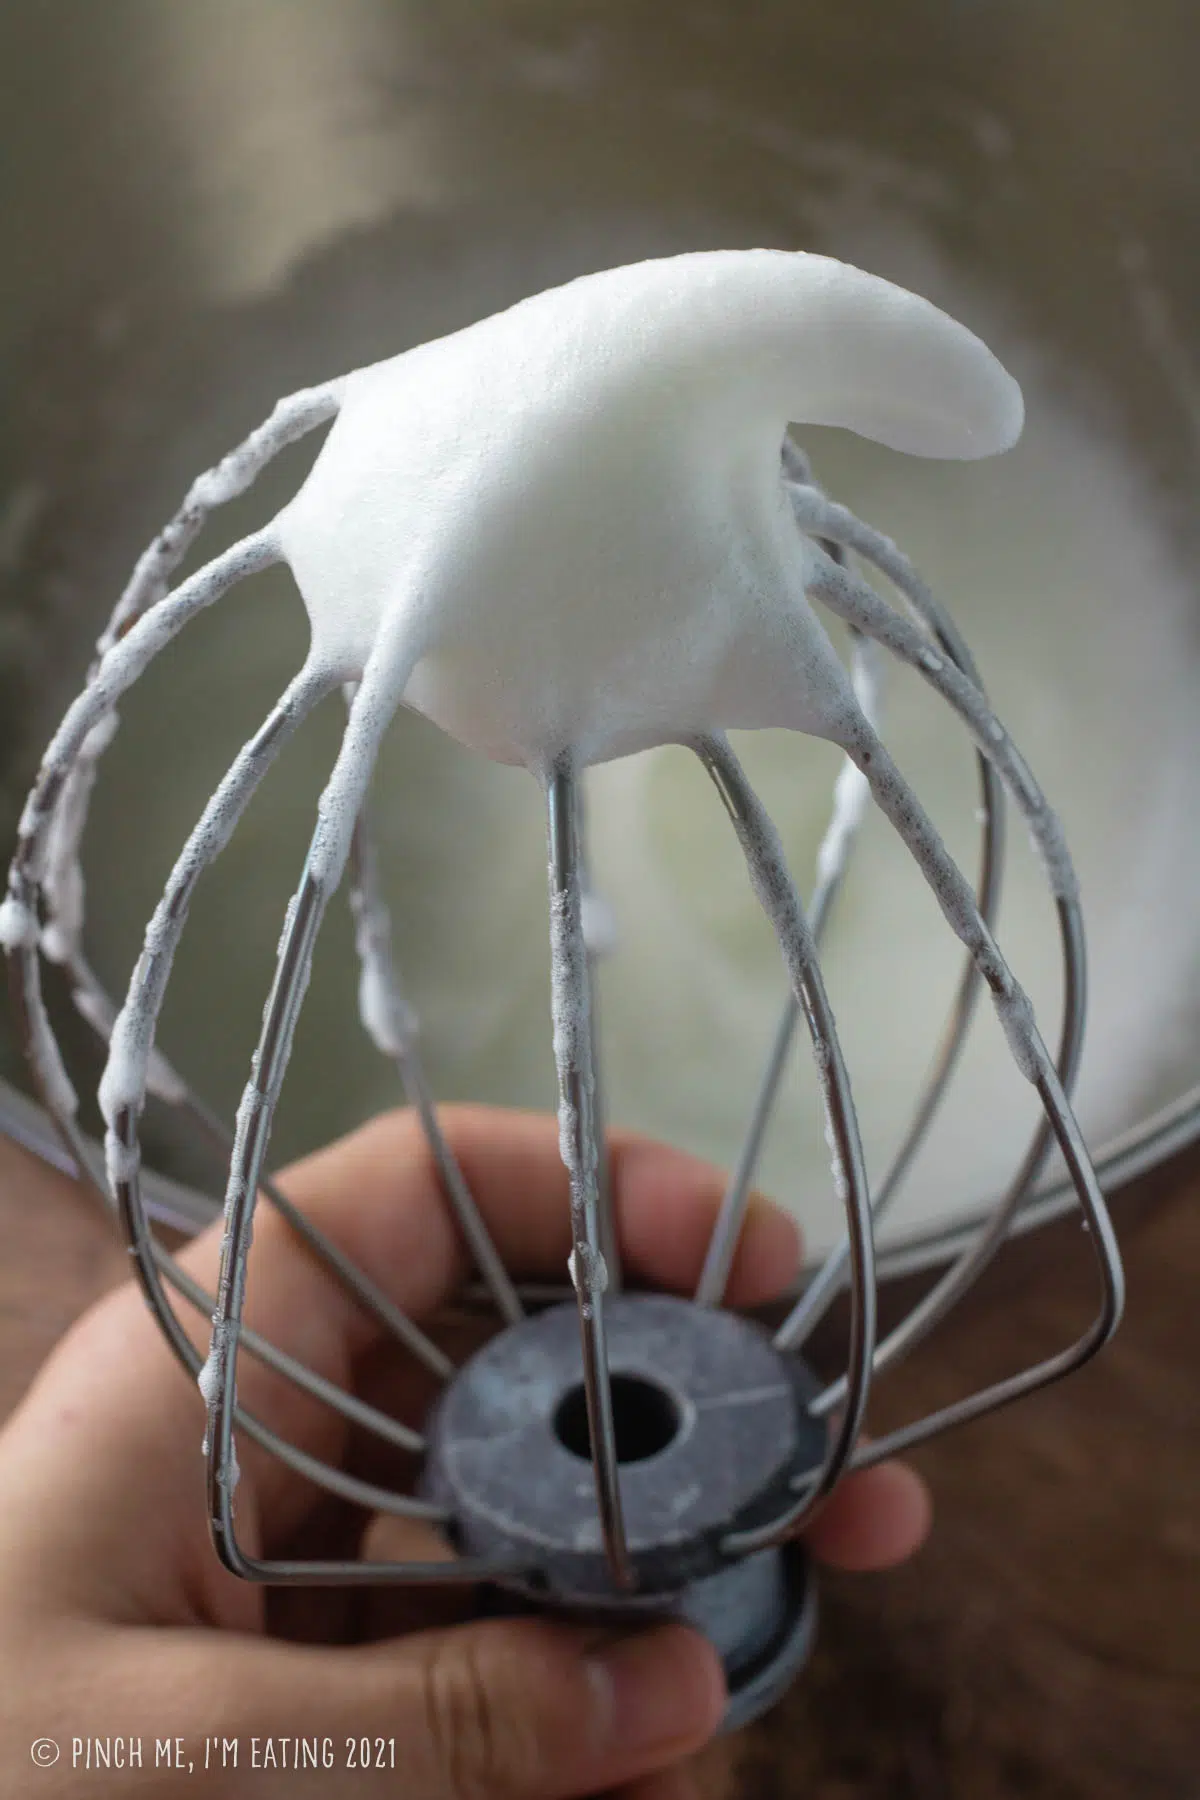 Egg whites whipped to stiff peaks on a whisk.